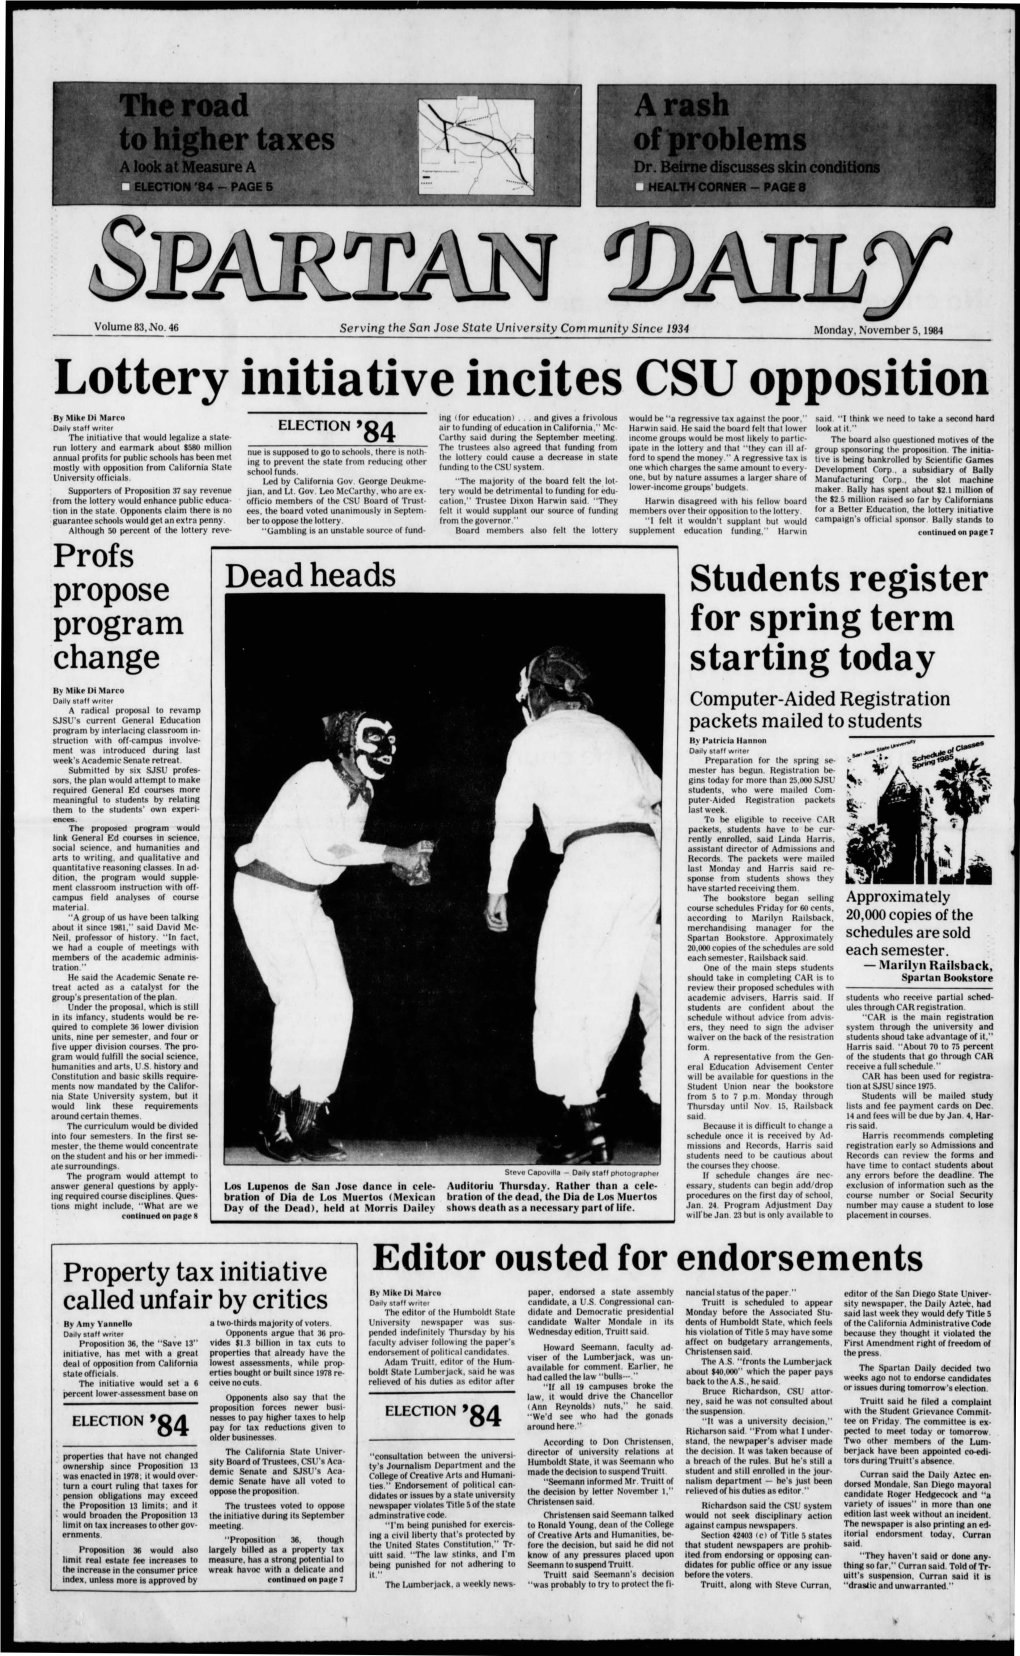 Lottery Initiative Incites CSU Opposition by Mike Di Marco Ing ( for Education)